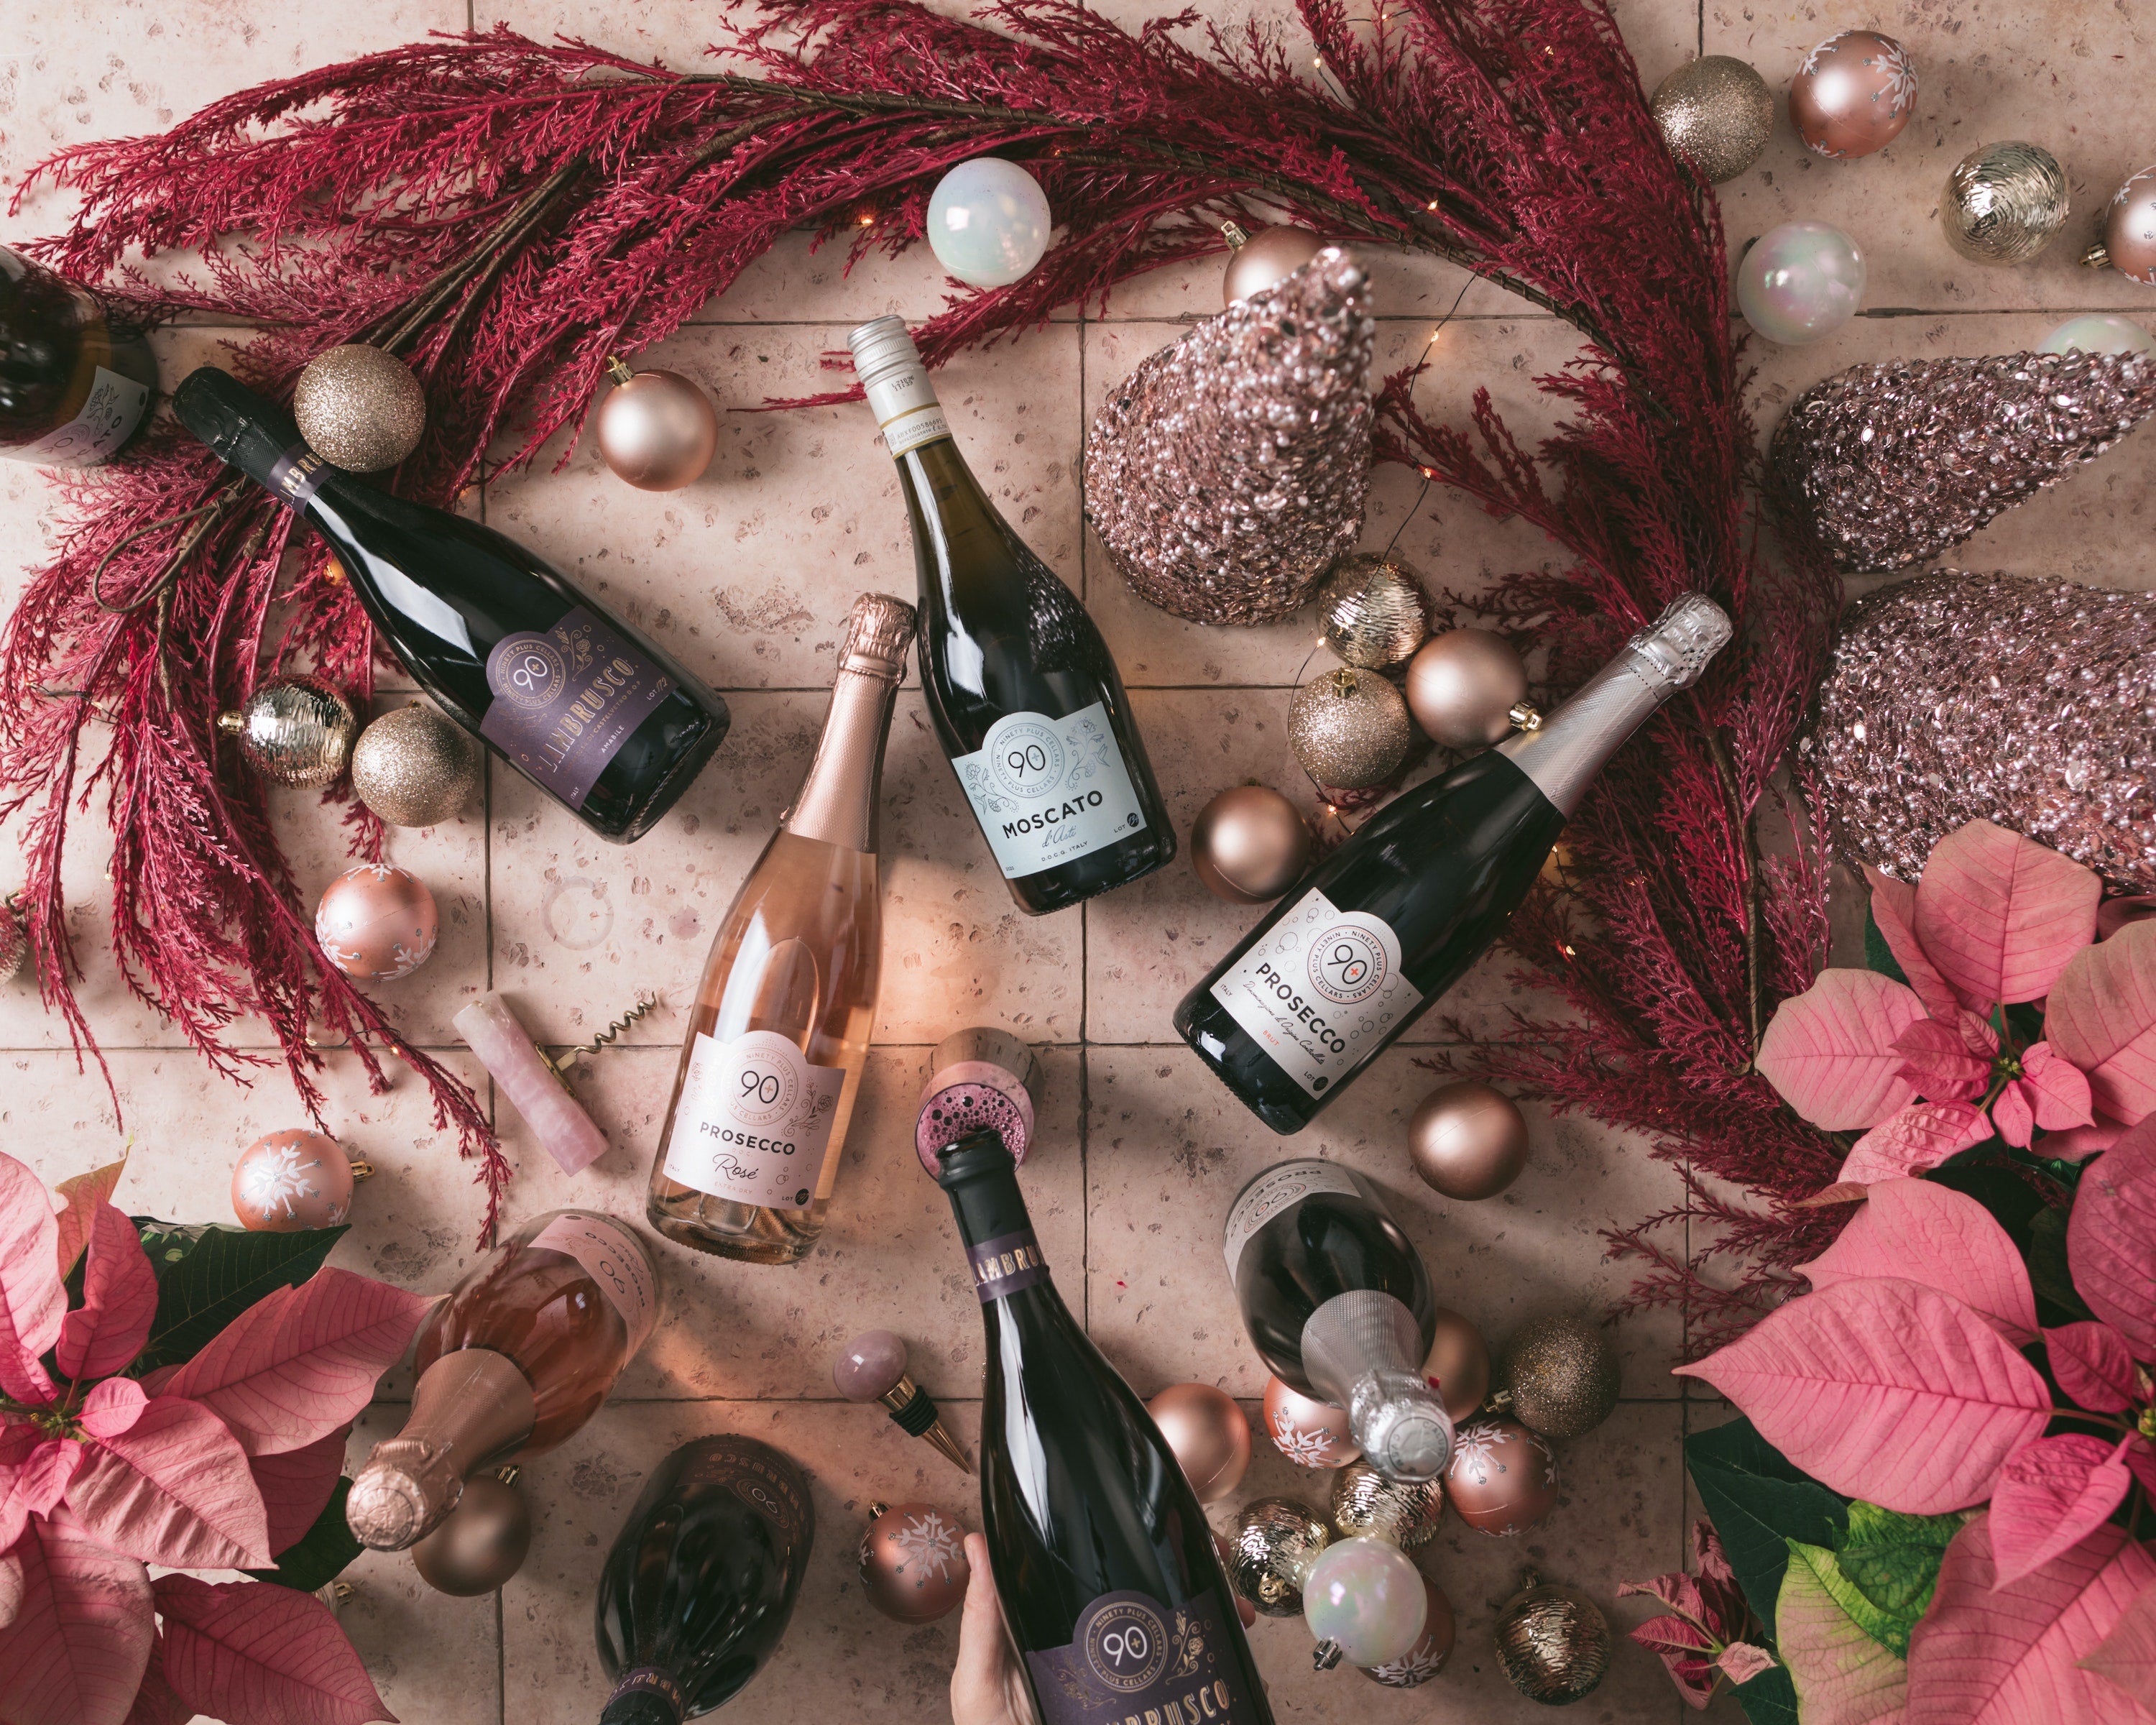 The best sparkling wines to celebrate the holidays